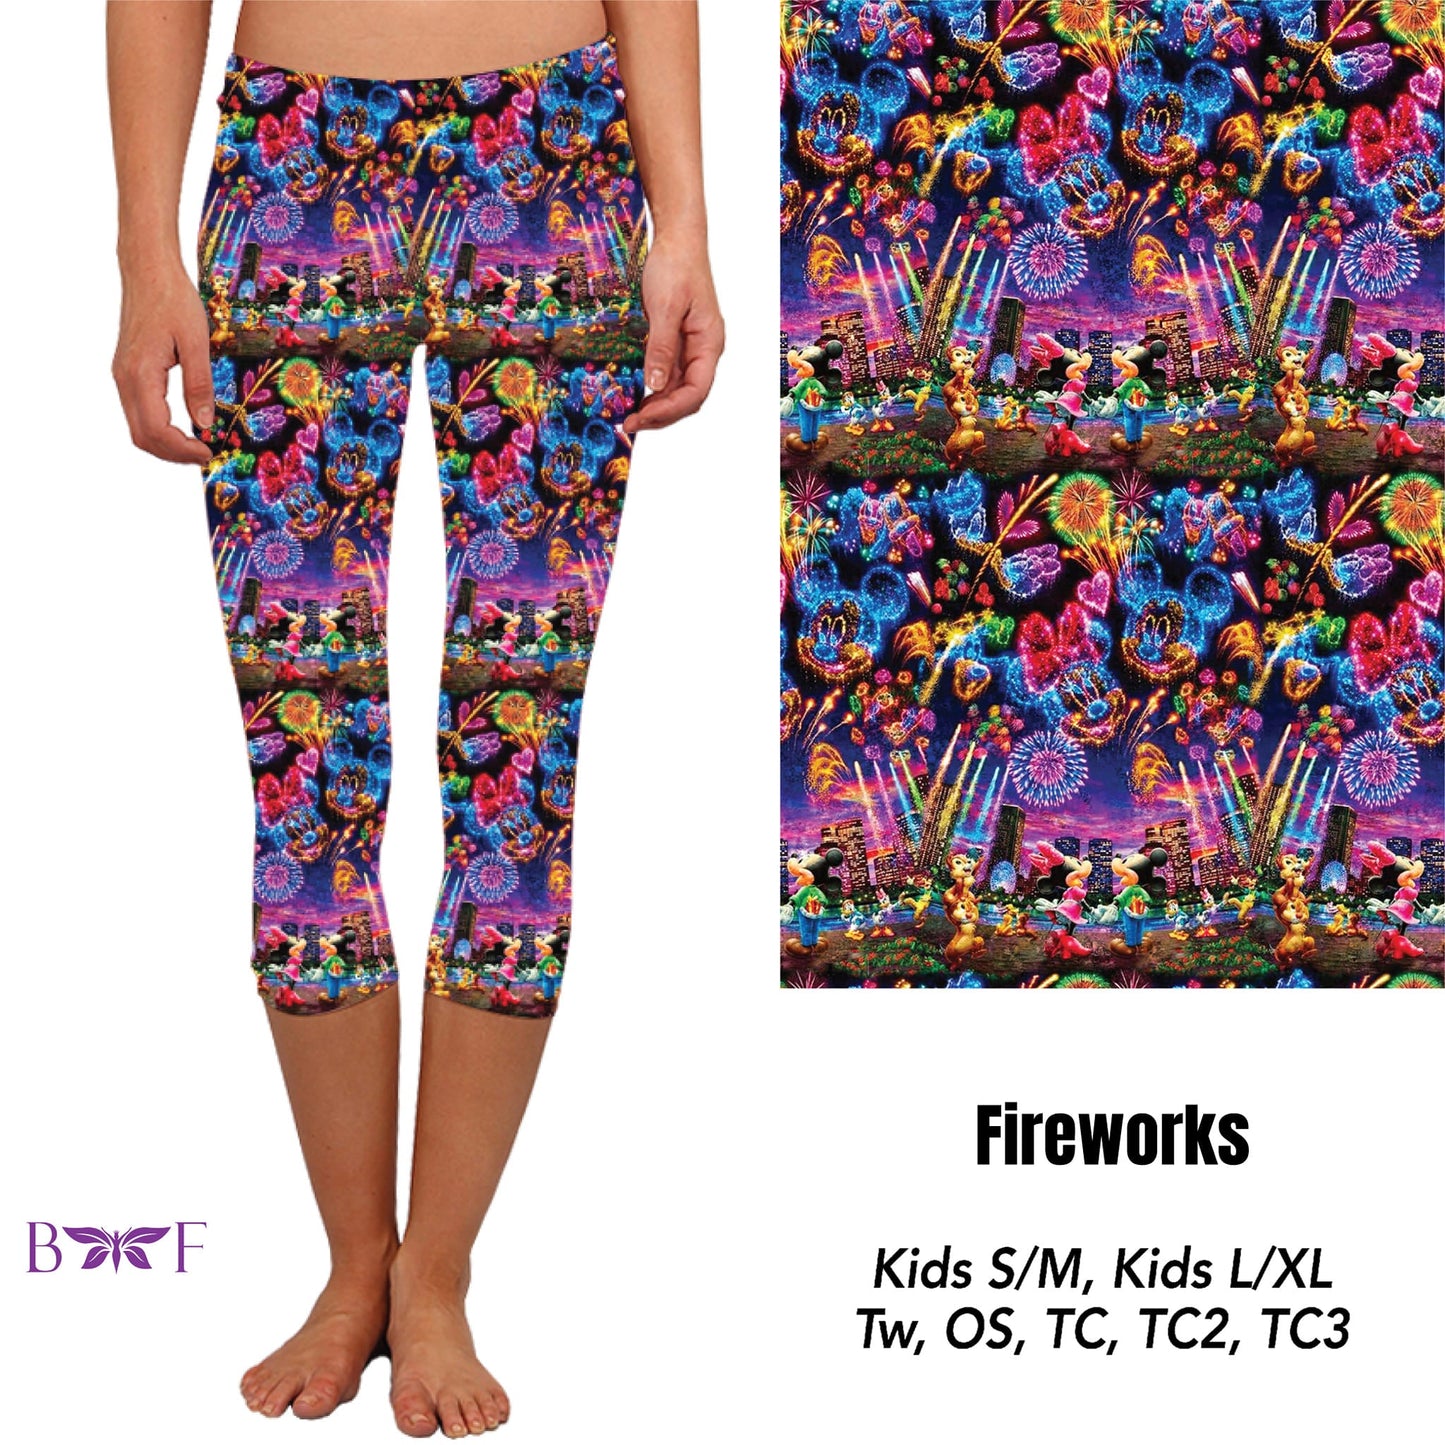 Fireworks Leggings, Capris, and shorts with pockets